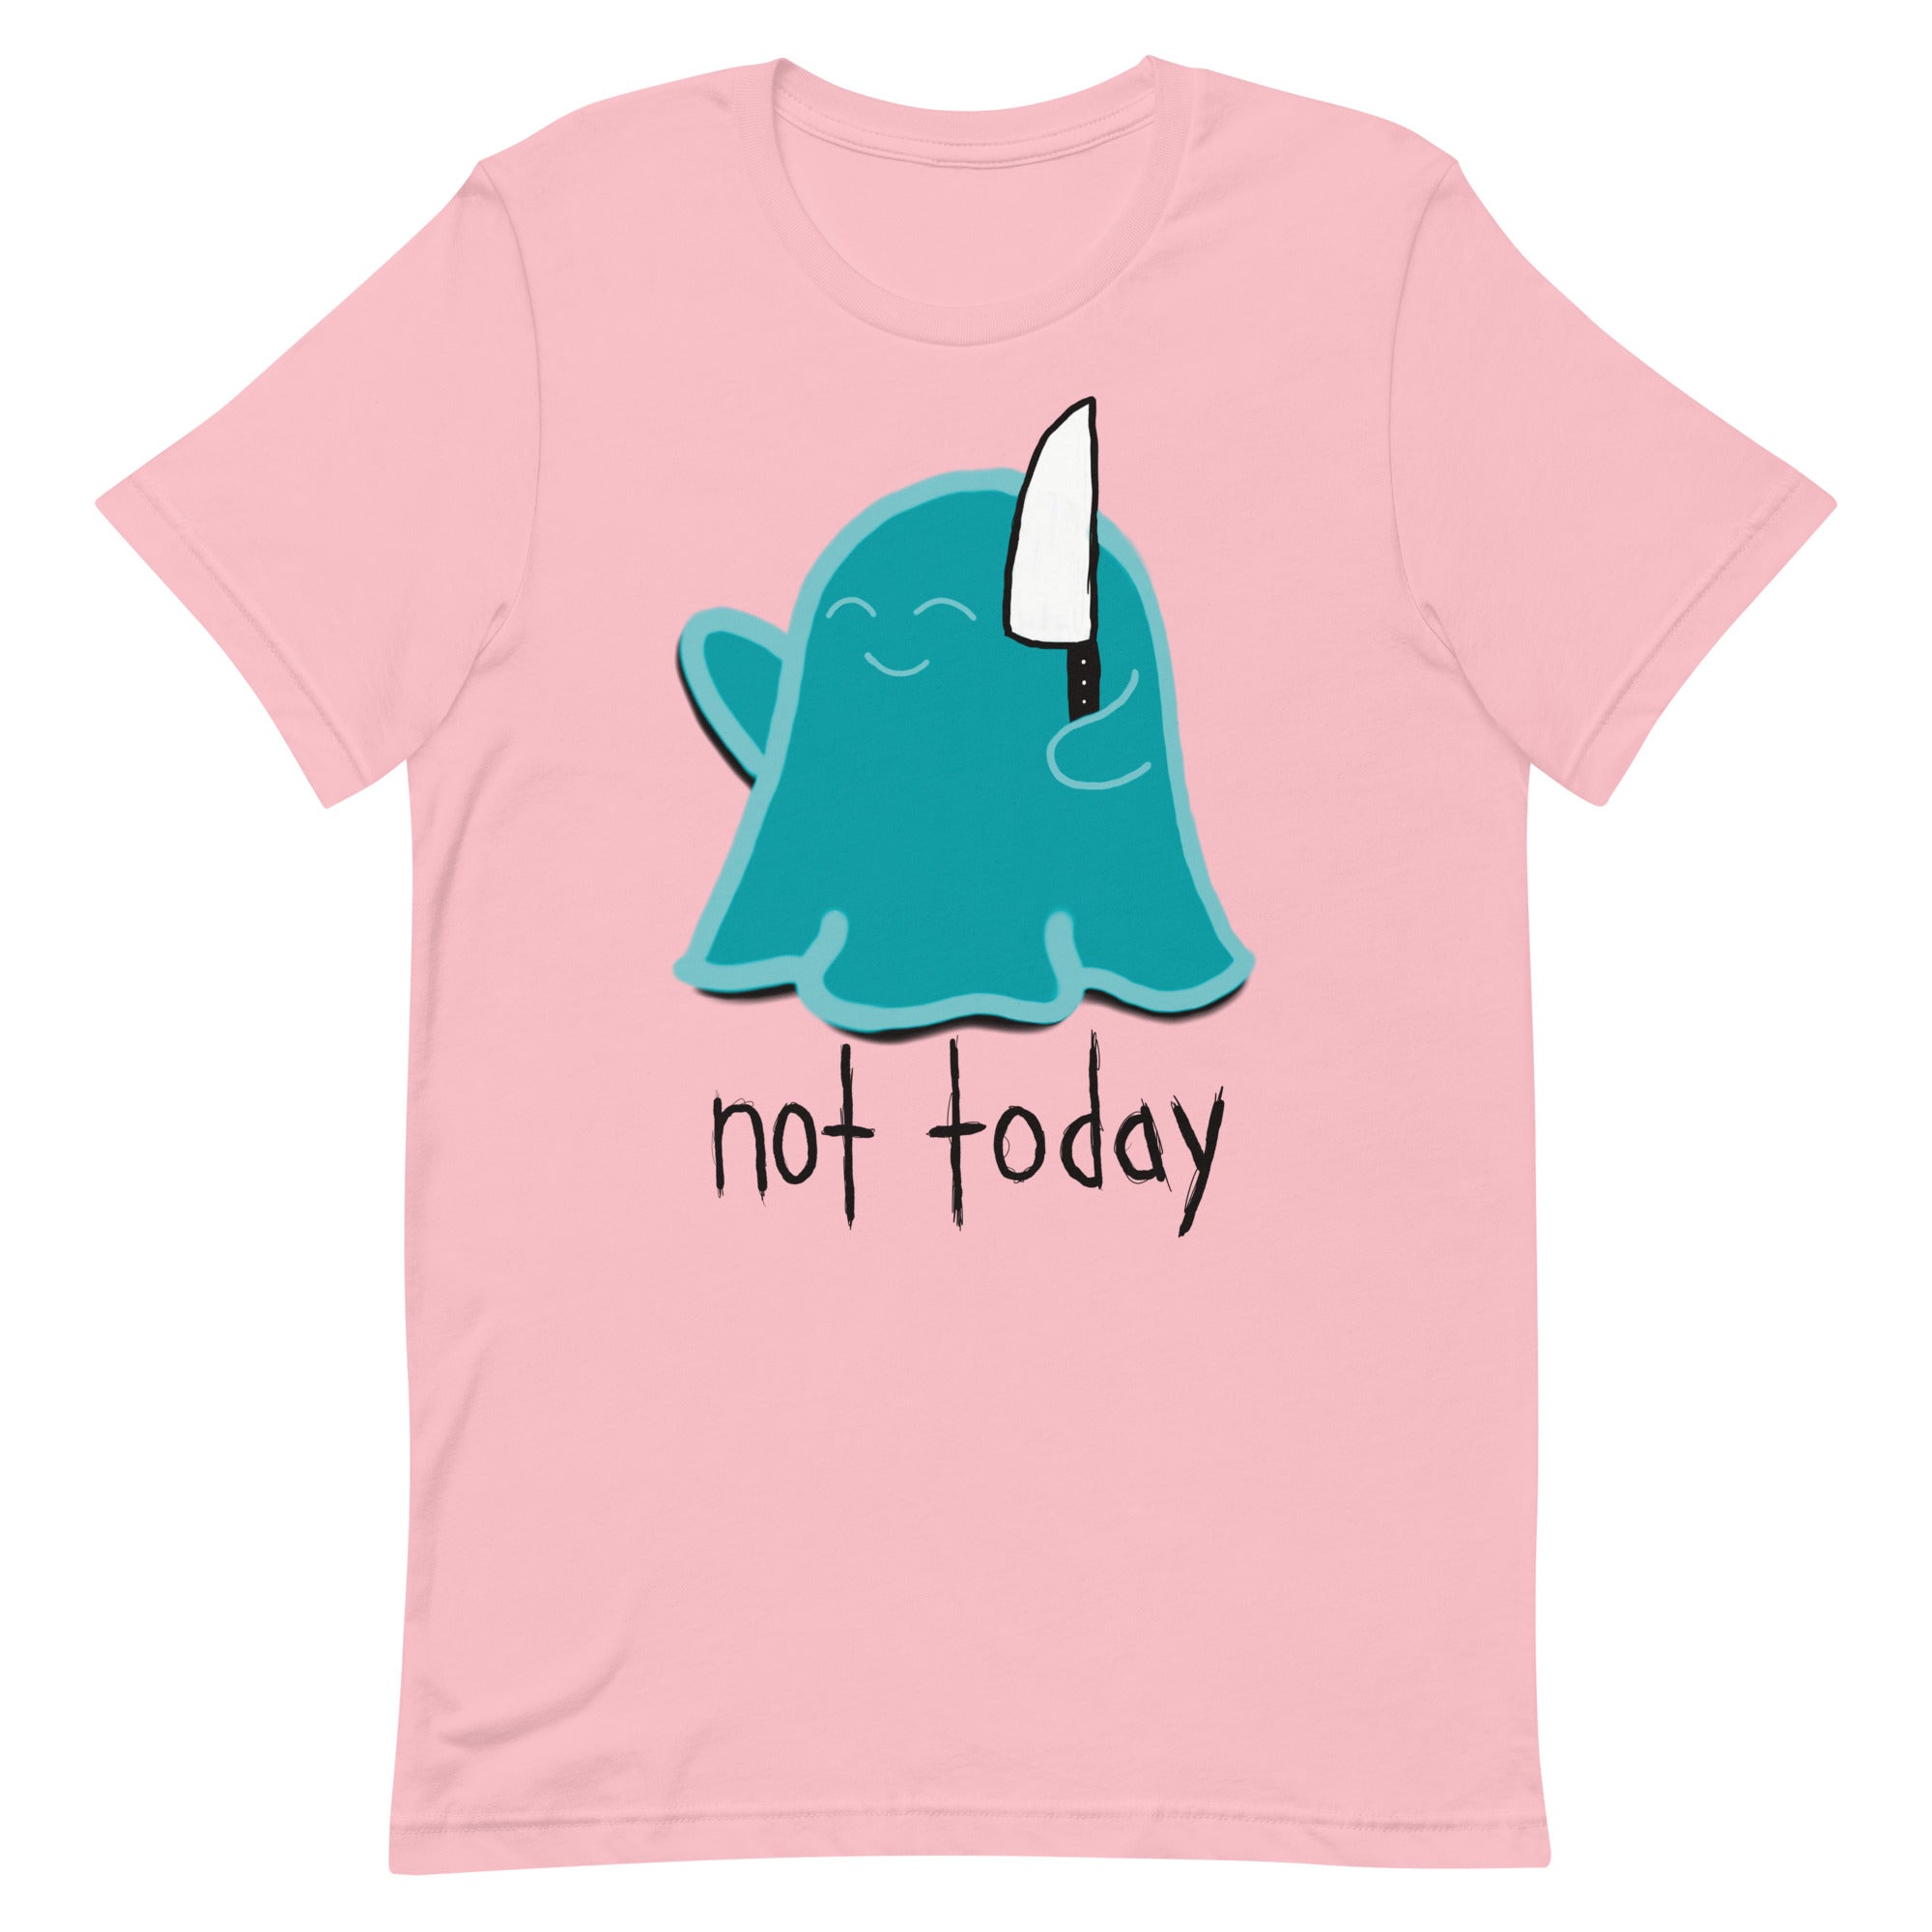 Not Today t-shirt